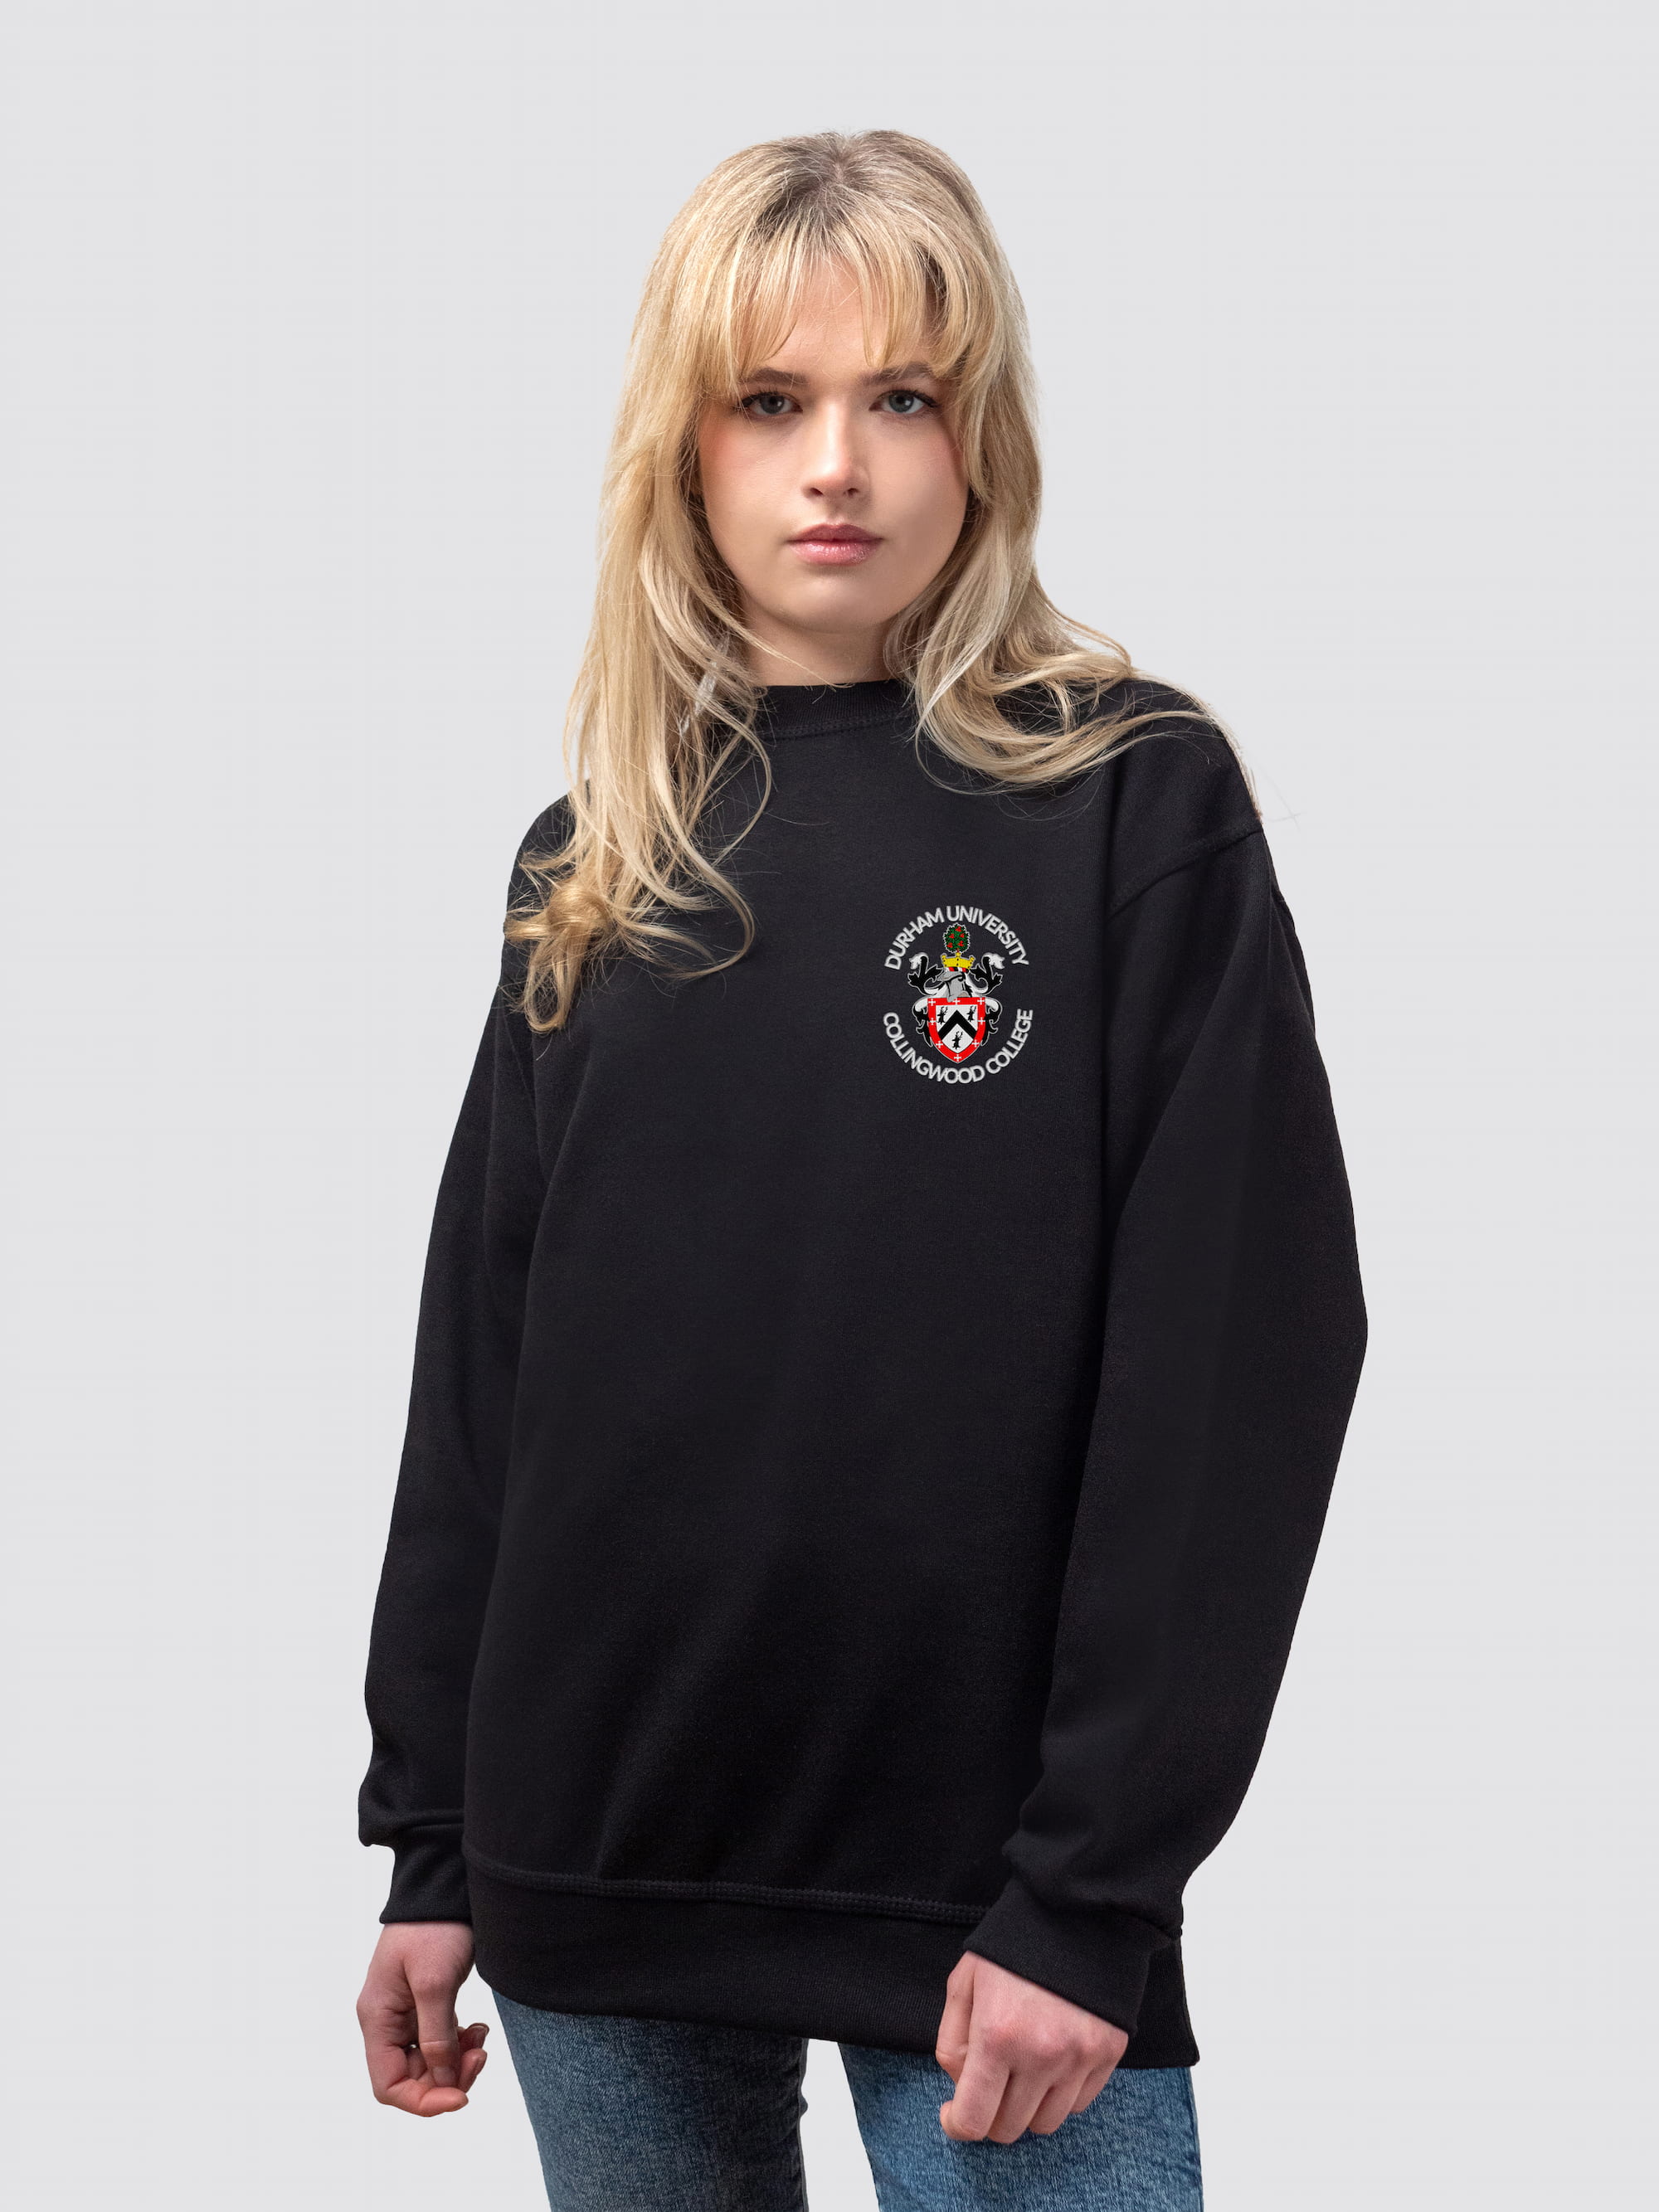 Collingwood crest on the front of a black, crew-neck sweatshirt